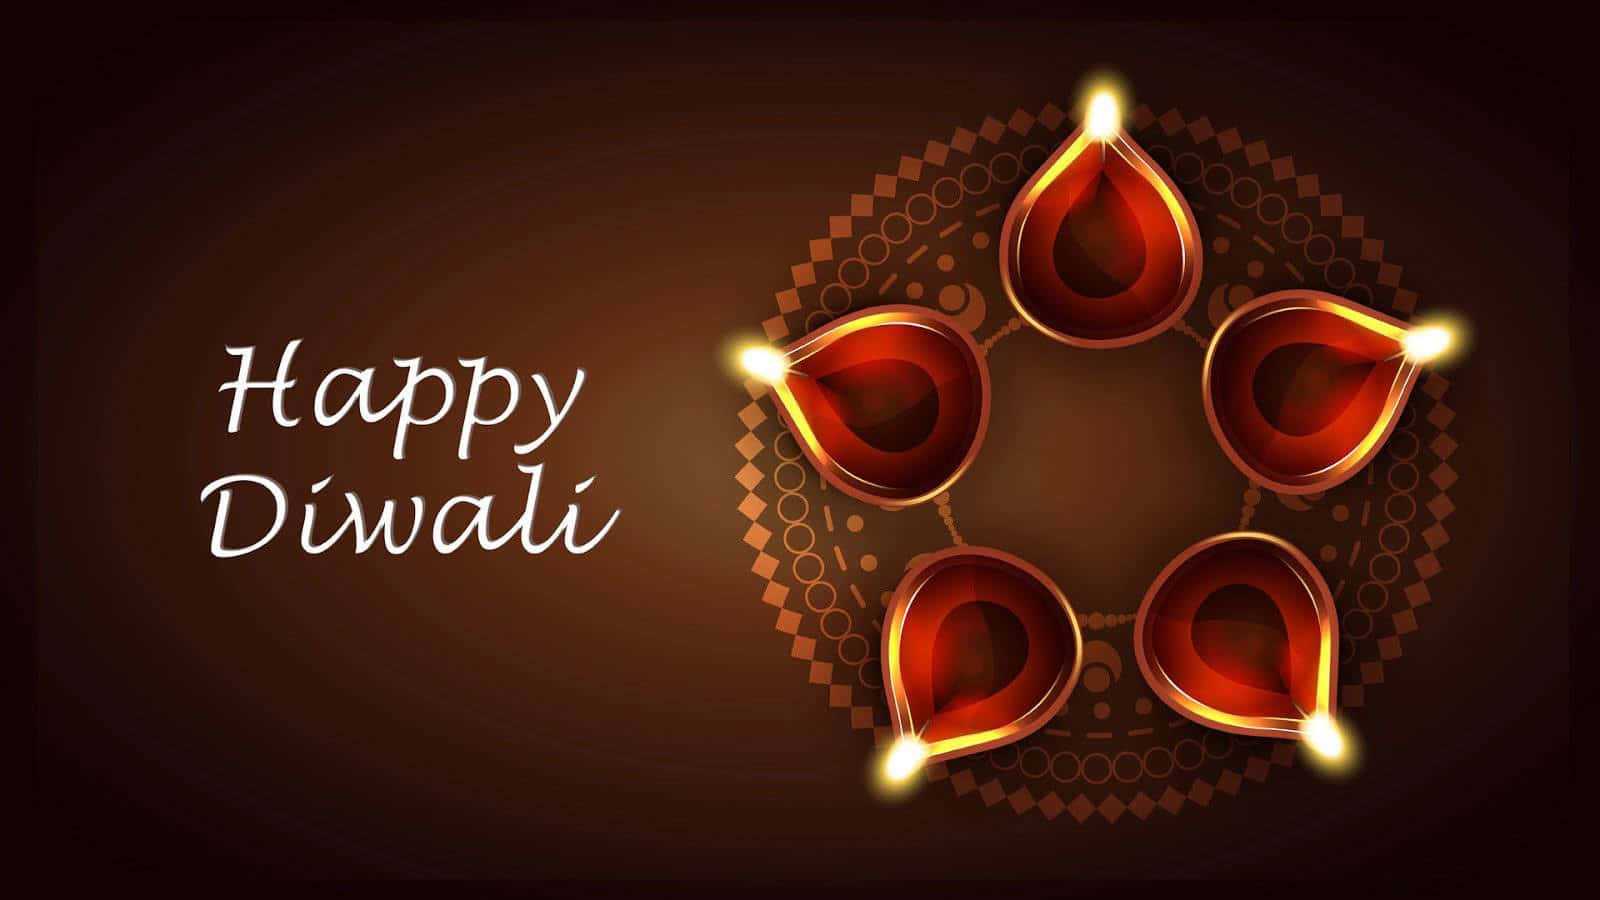 Happy Diwali Images With Candles